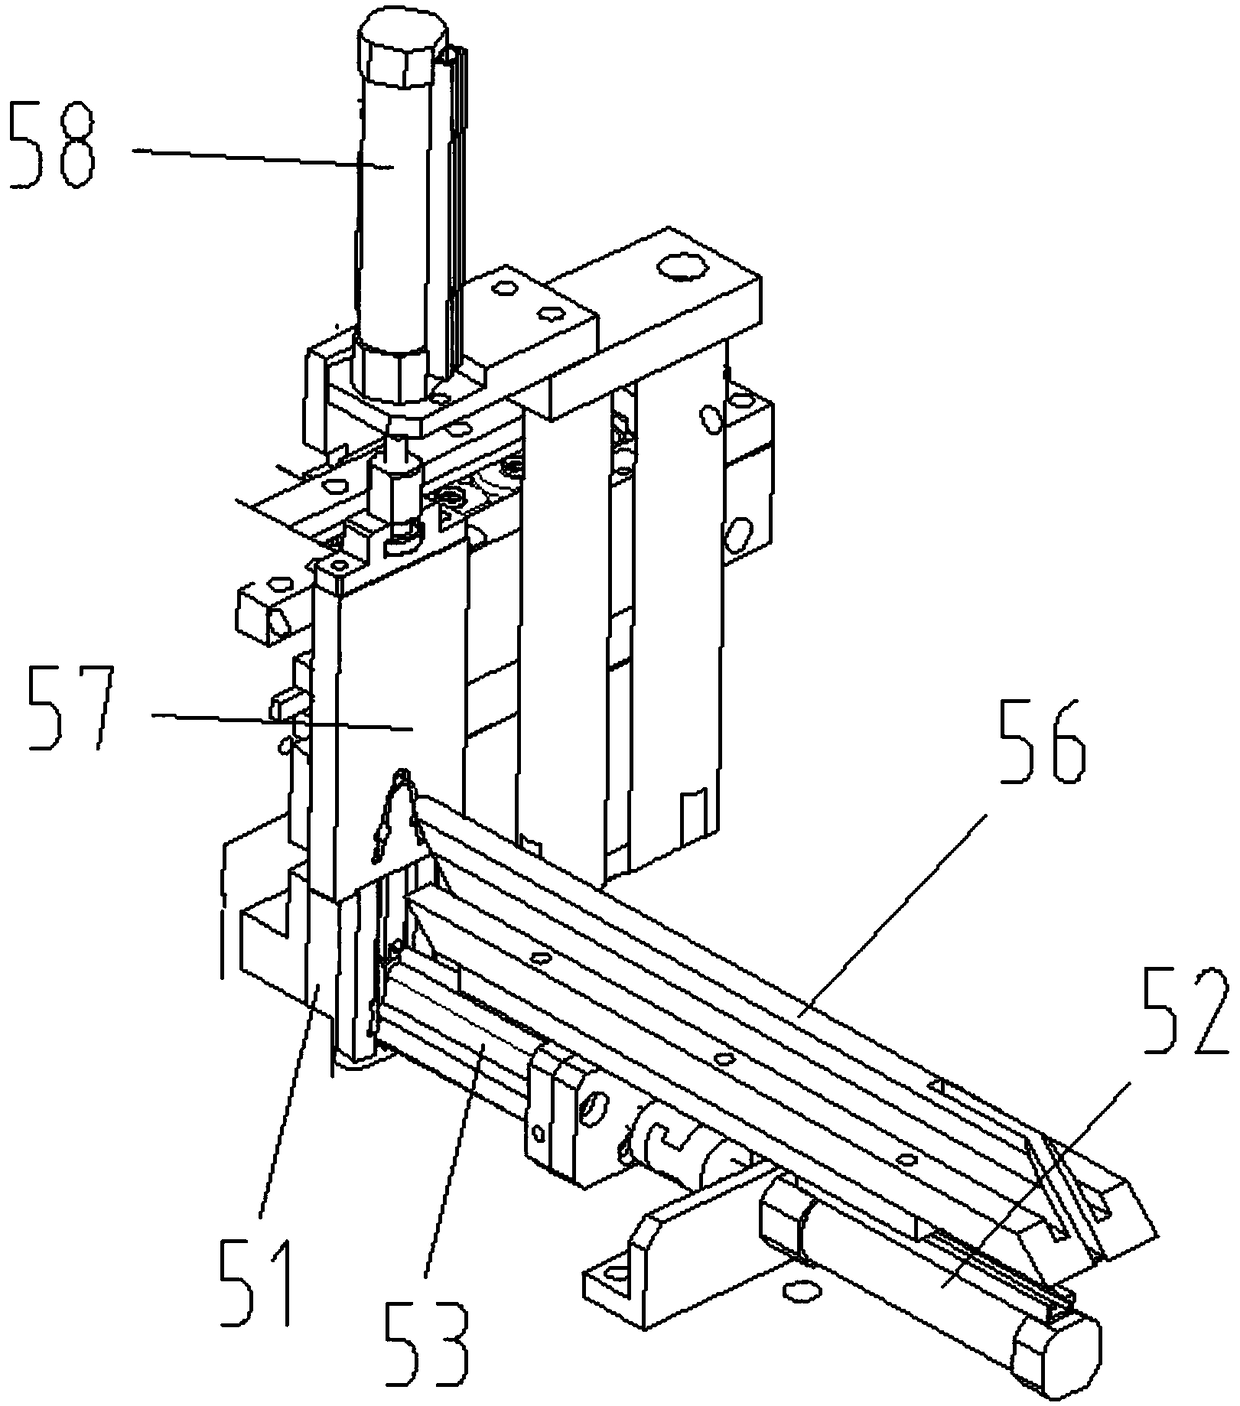 A magnetic tile assembly mechanism for a micro-motor stator